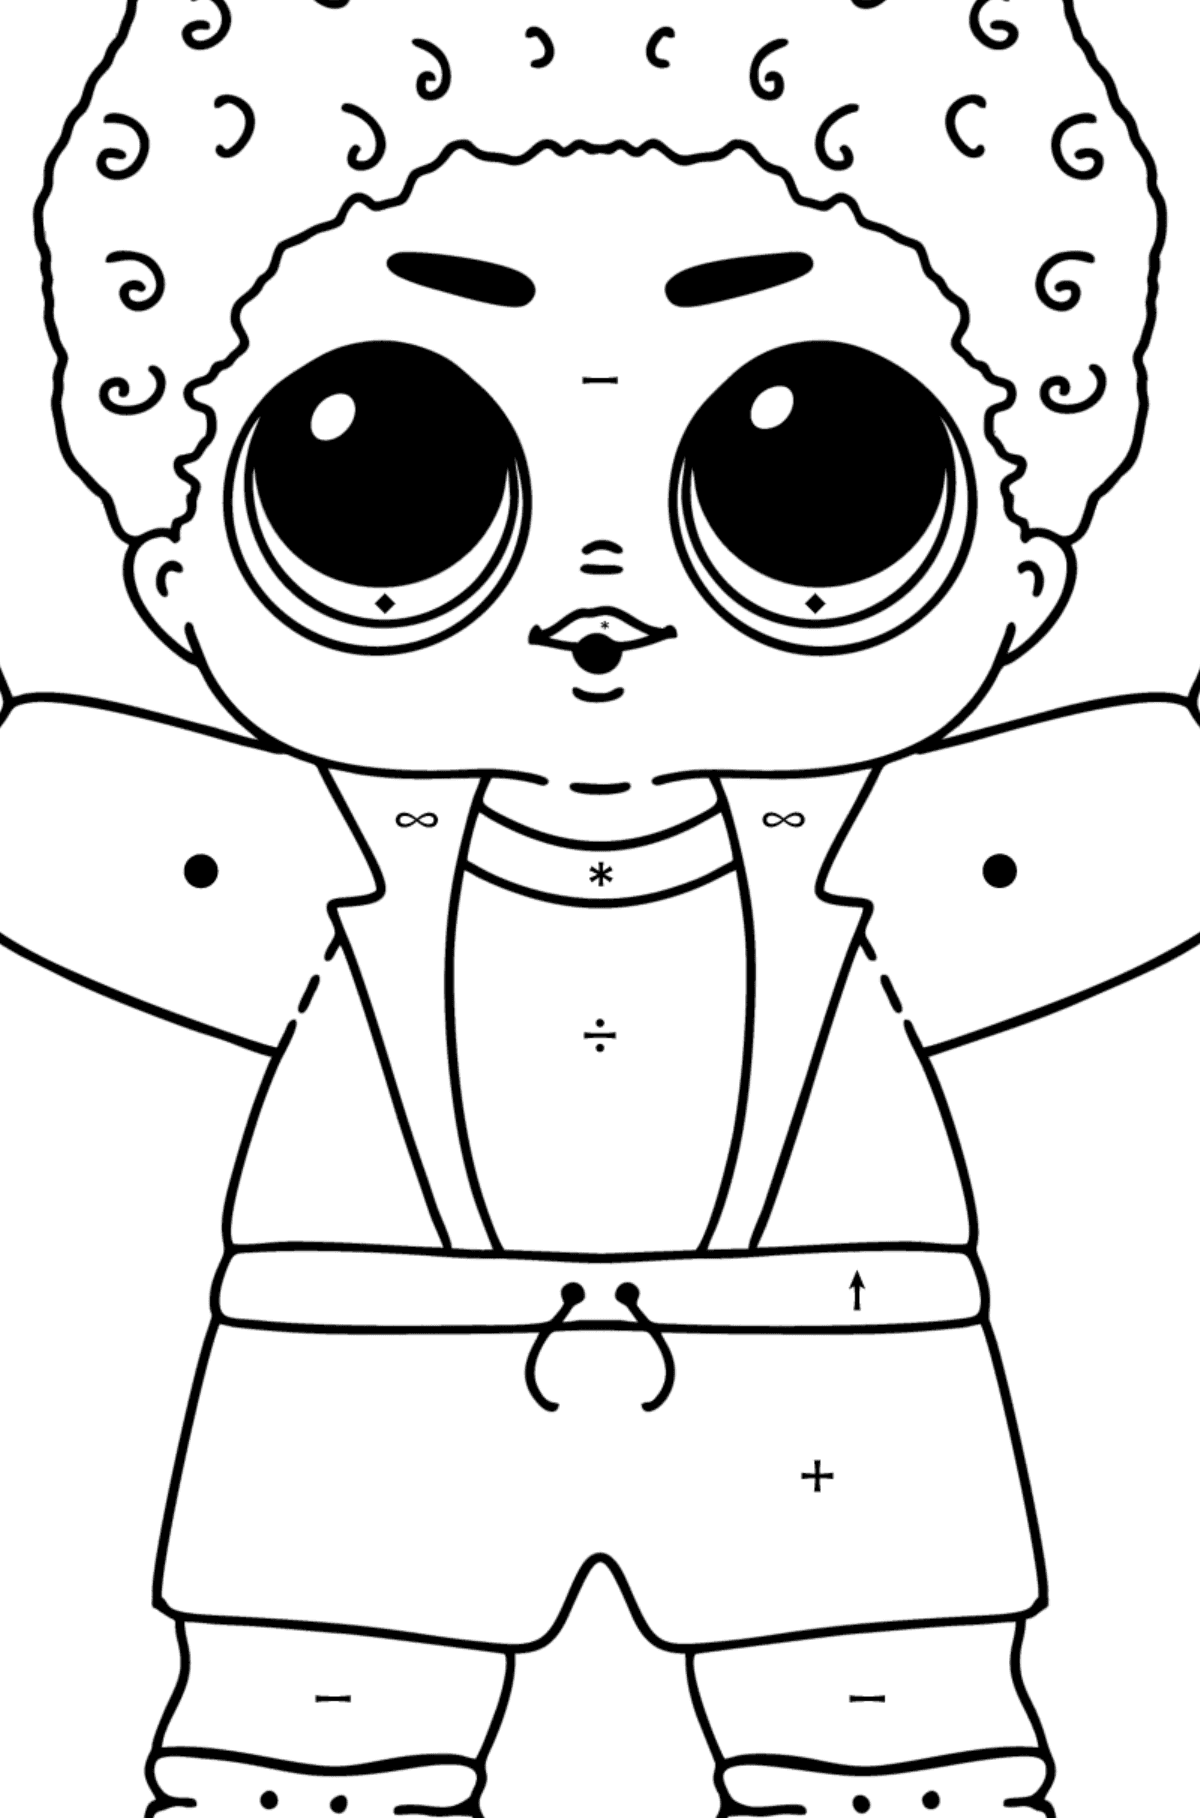 Coloring page LOL boy King - Coloring by Symbols for Kids